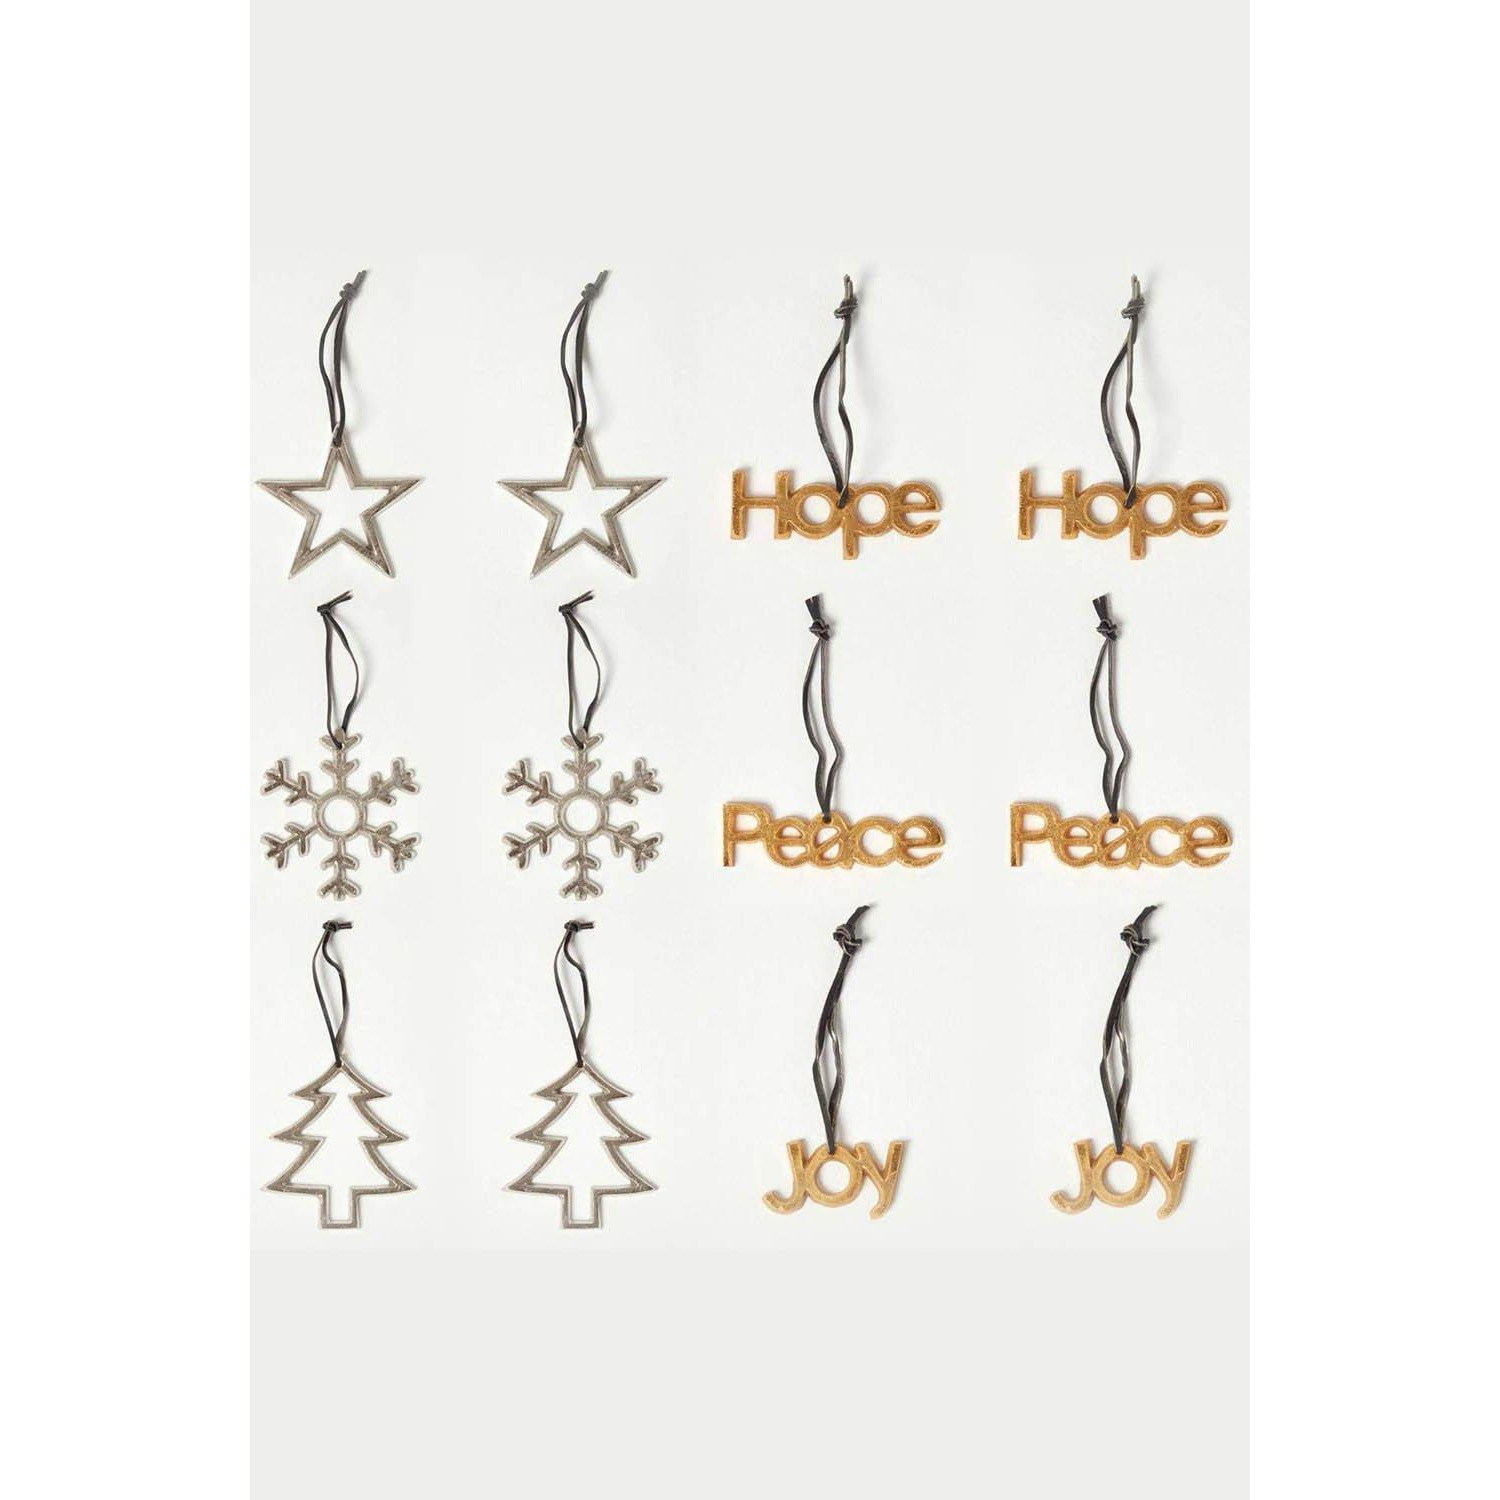 Set of 12 Gold and Silver Christmas Tree Decorations - image 1